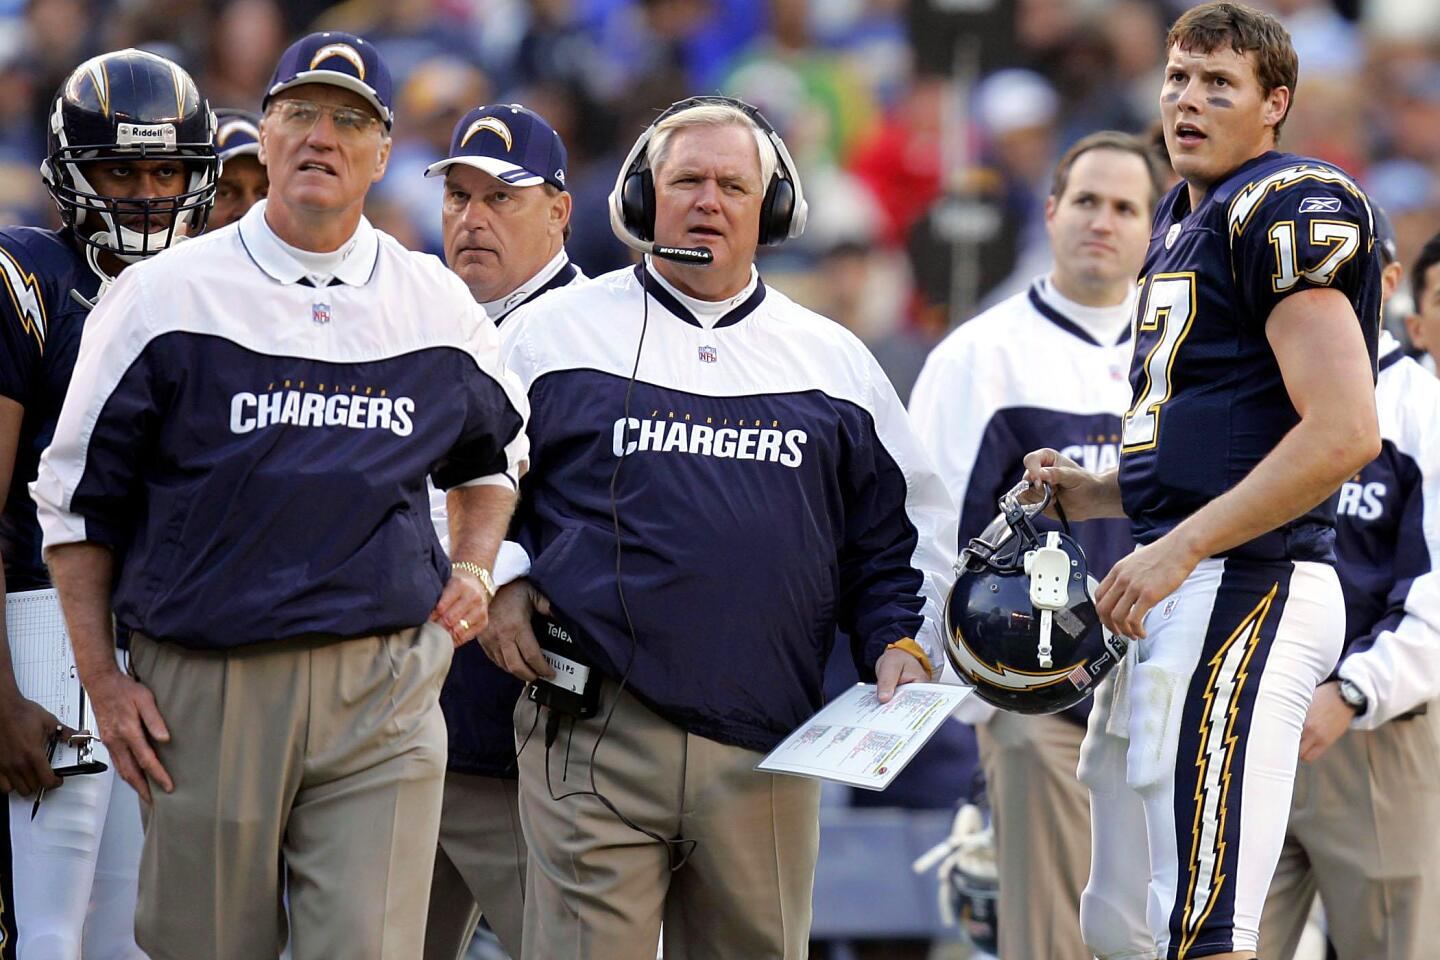 Chargers vs Chiefs 1/2/05